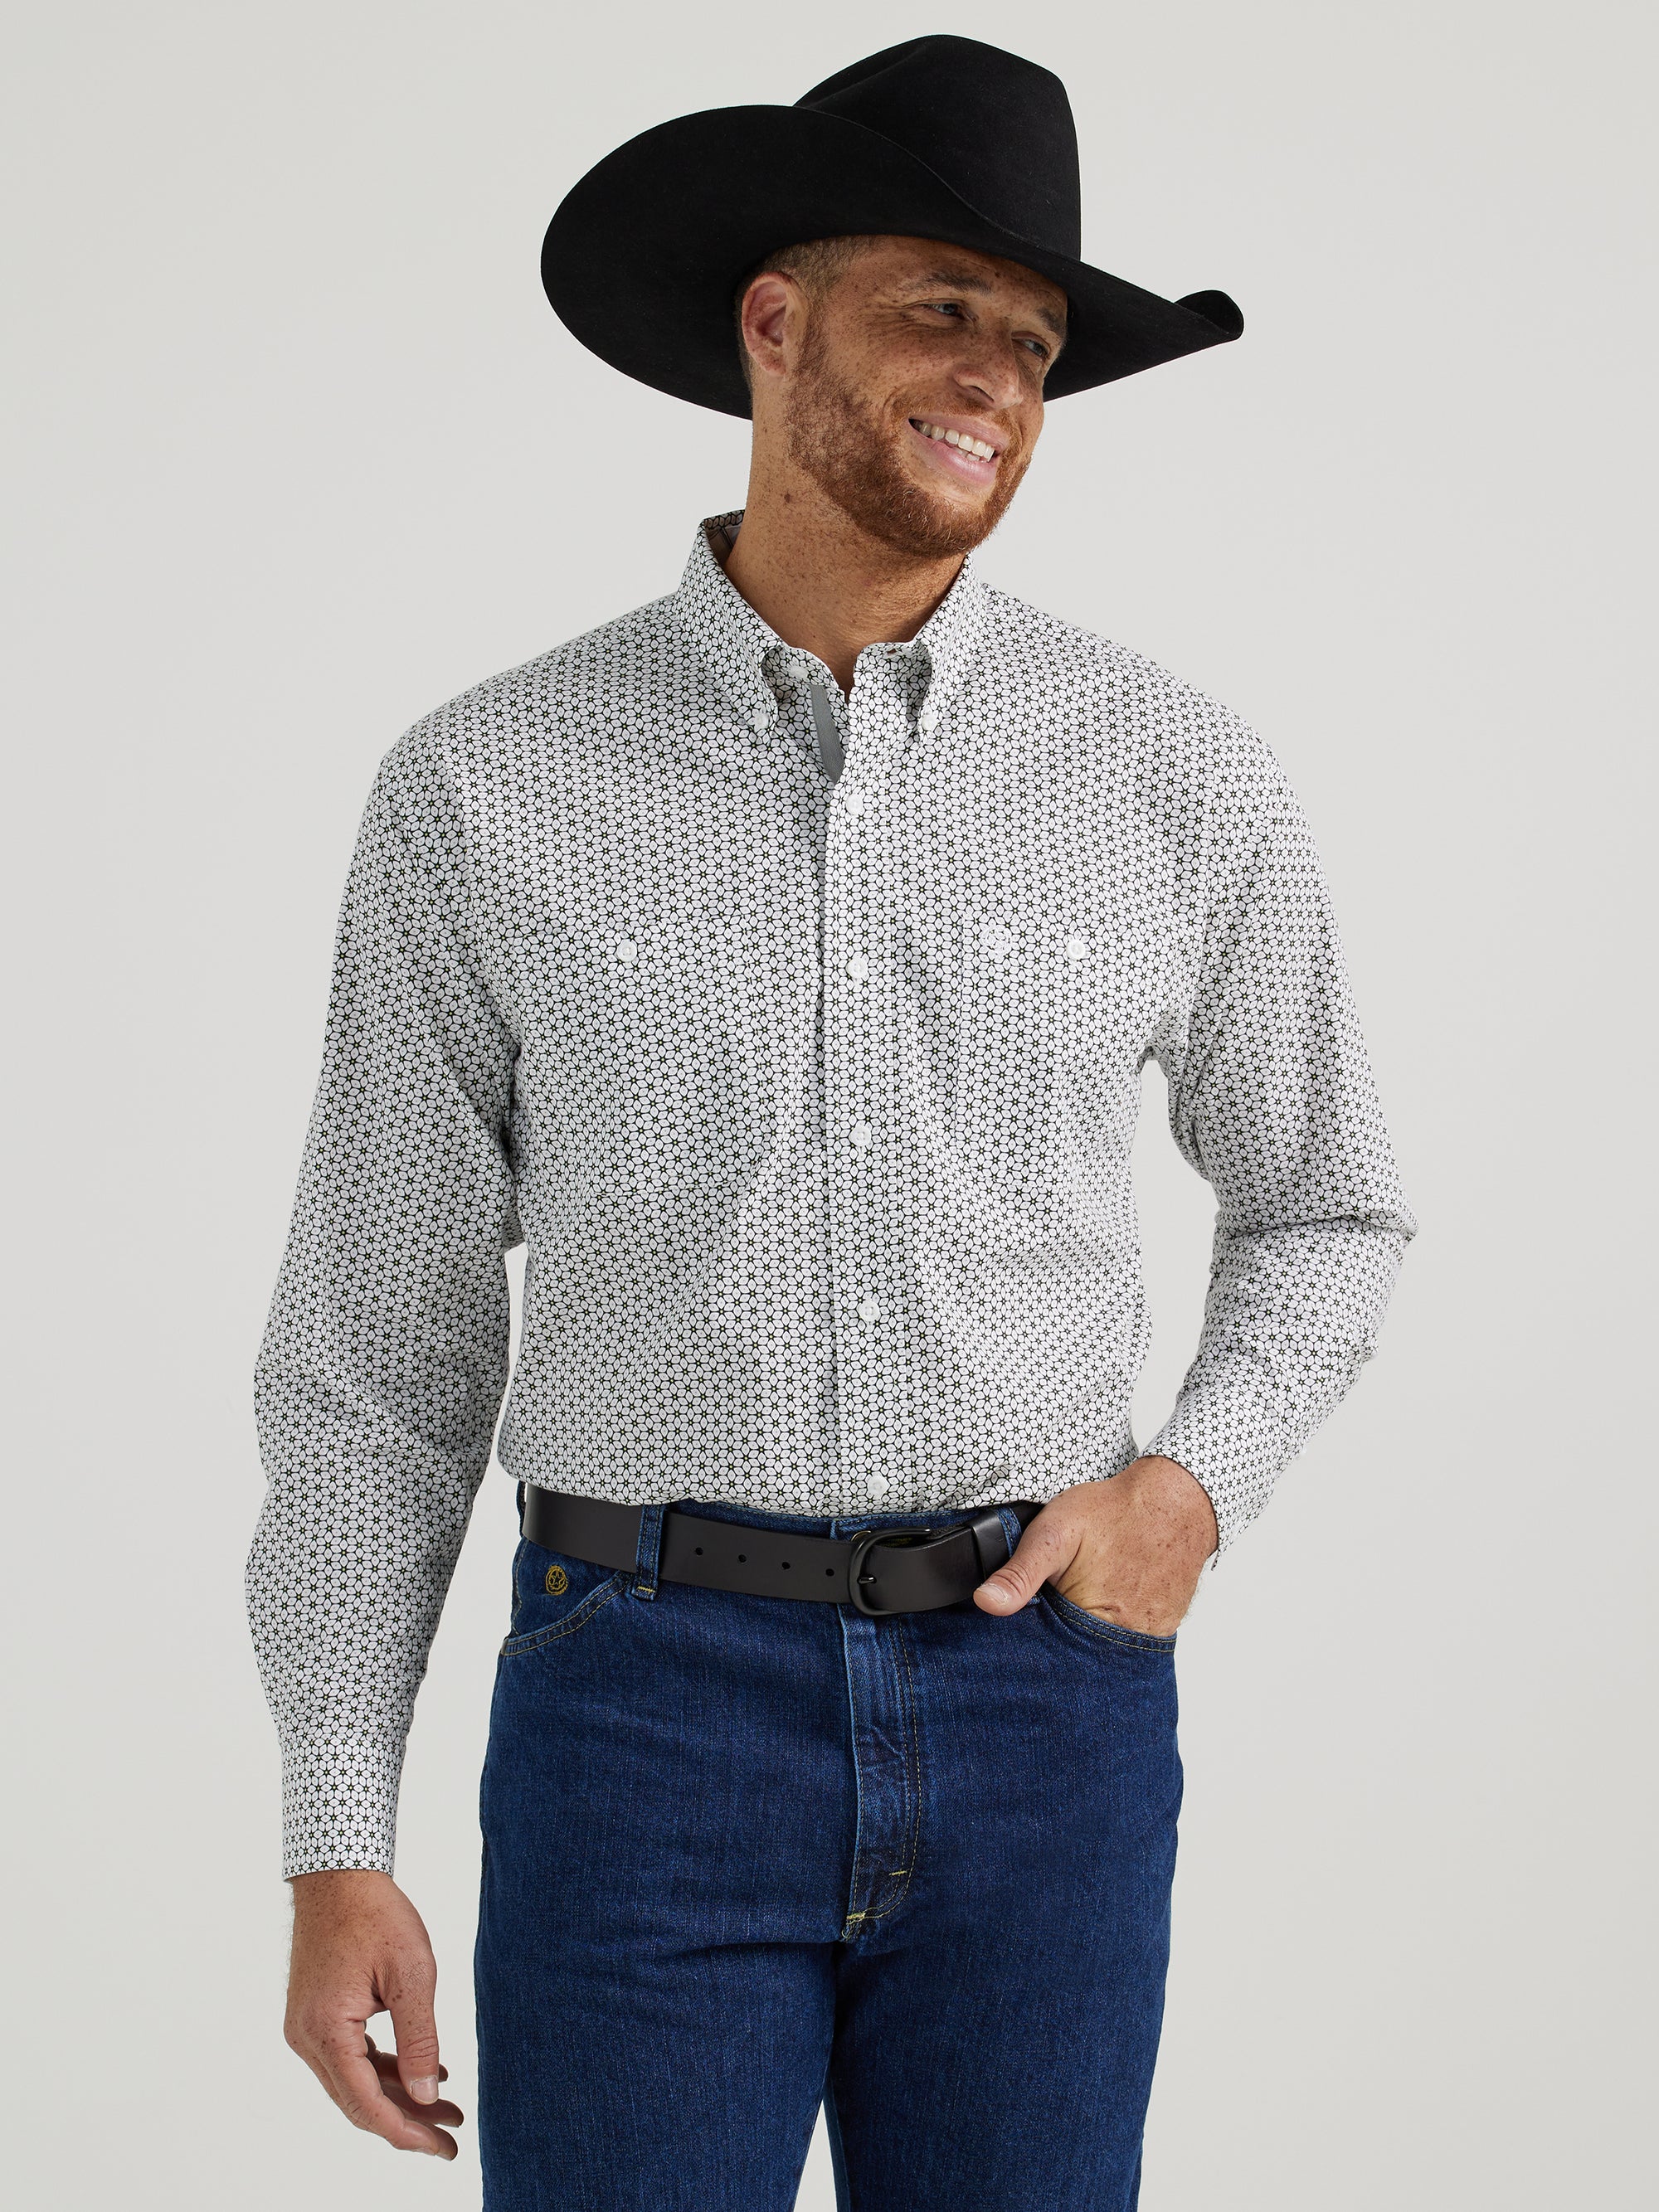 Wrangler Mens George Strait Relaxed Fit Floral Stretch Shirt